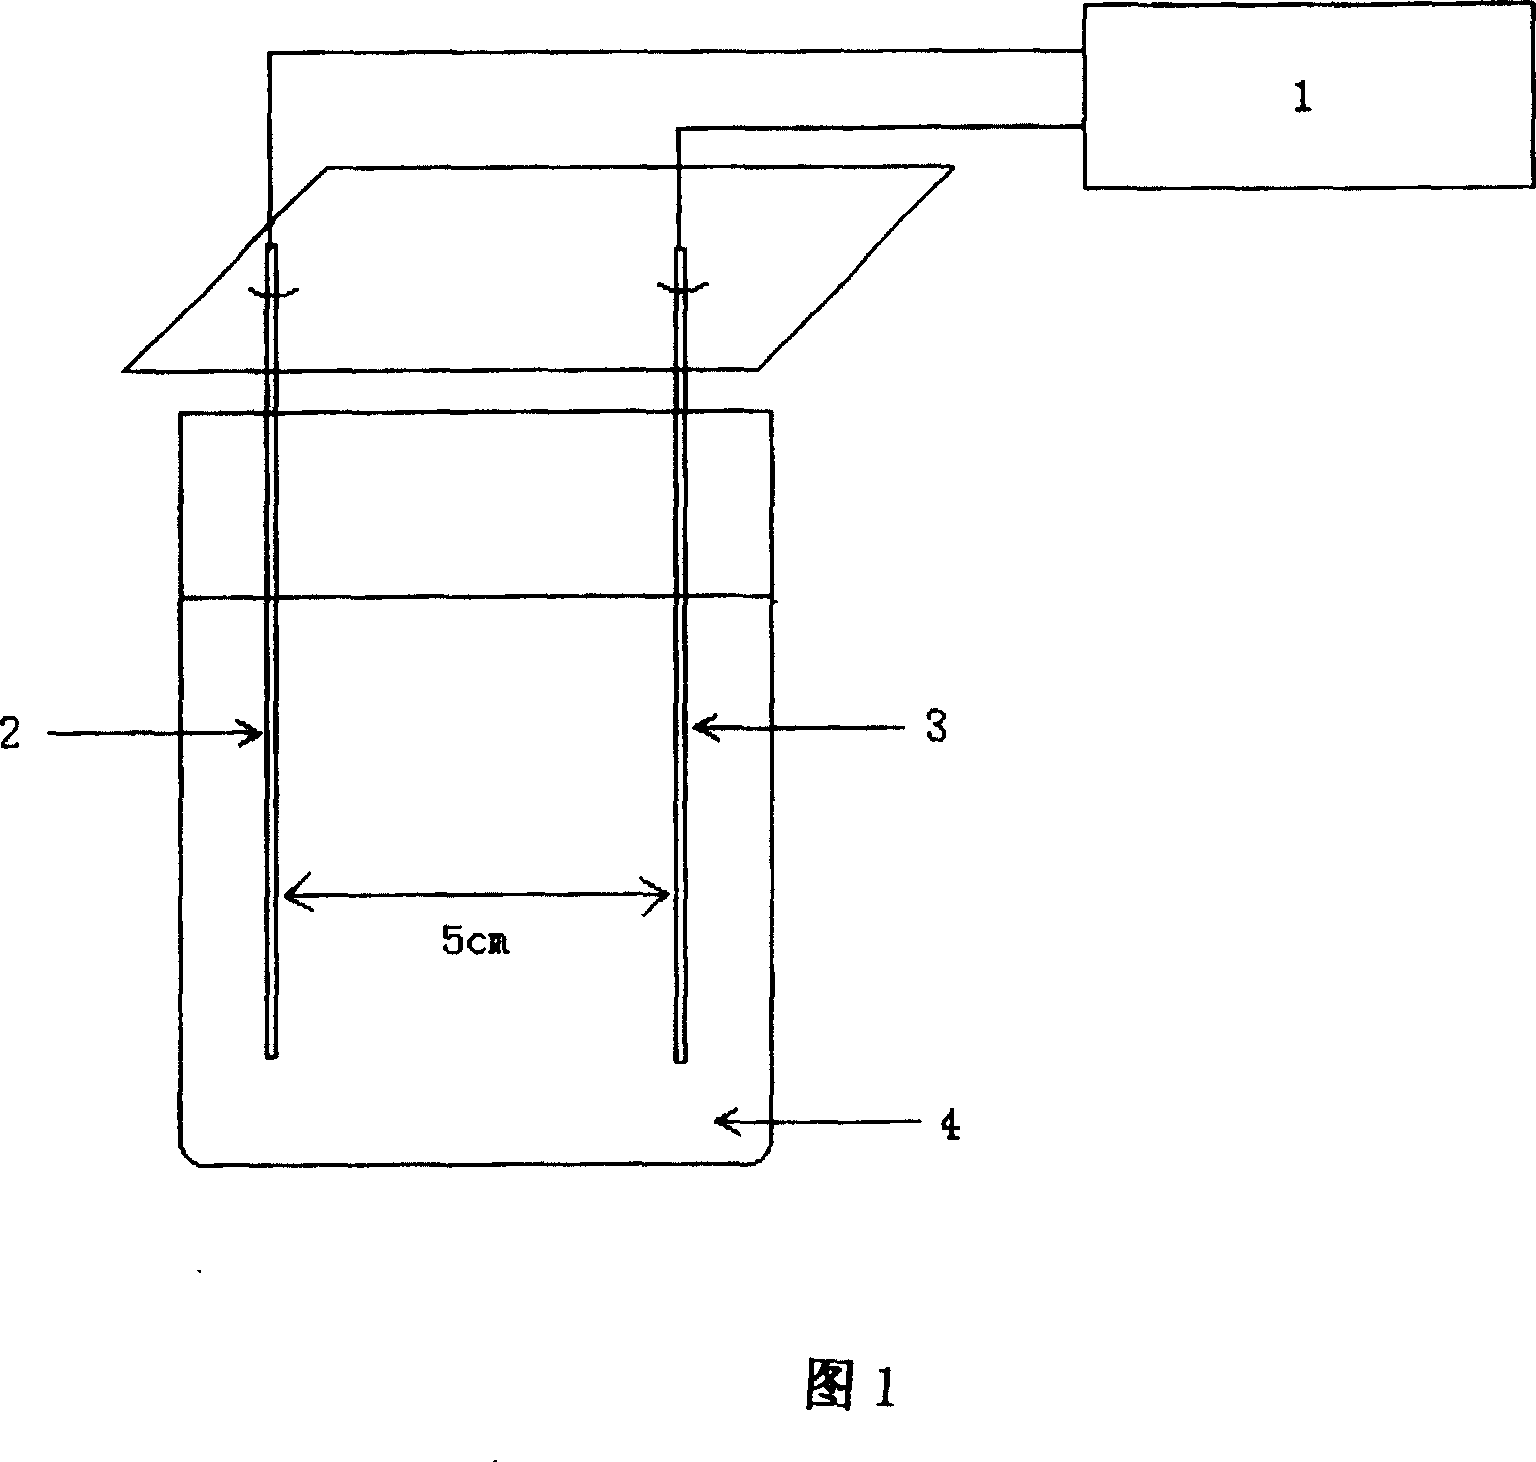 Method for preparing high temperature superconductor thick film of Ba/YCu with large area by using electrophoresis technique